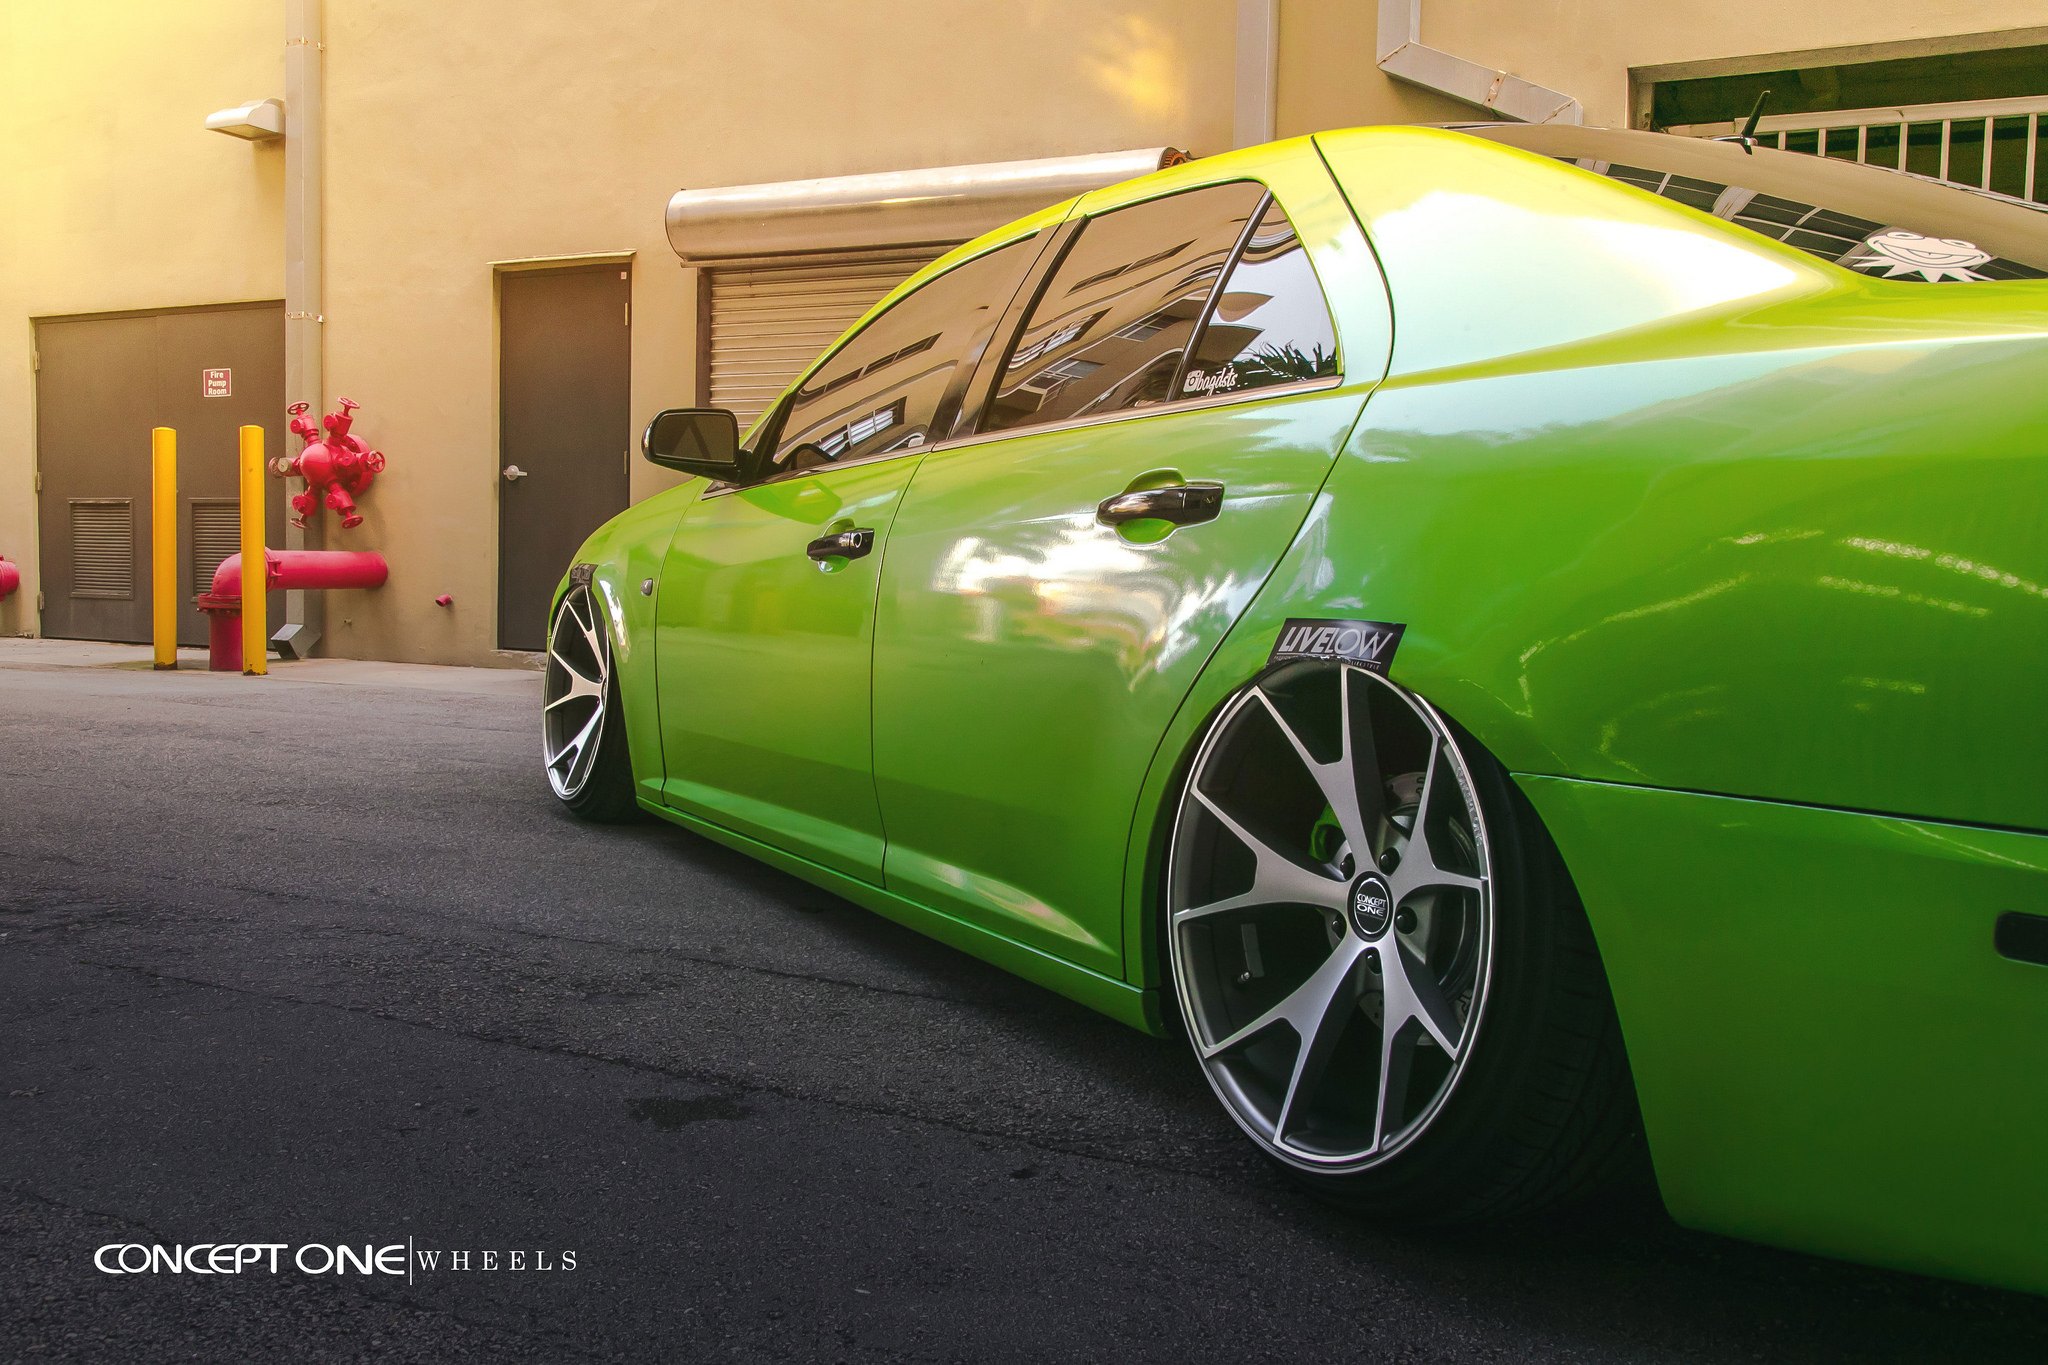 Aftermarket Side Skirts on Green Lowered Cadillac STS - Photo by Concept One